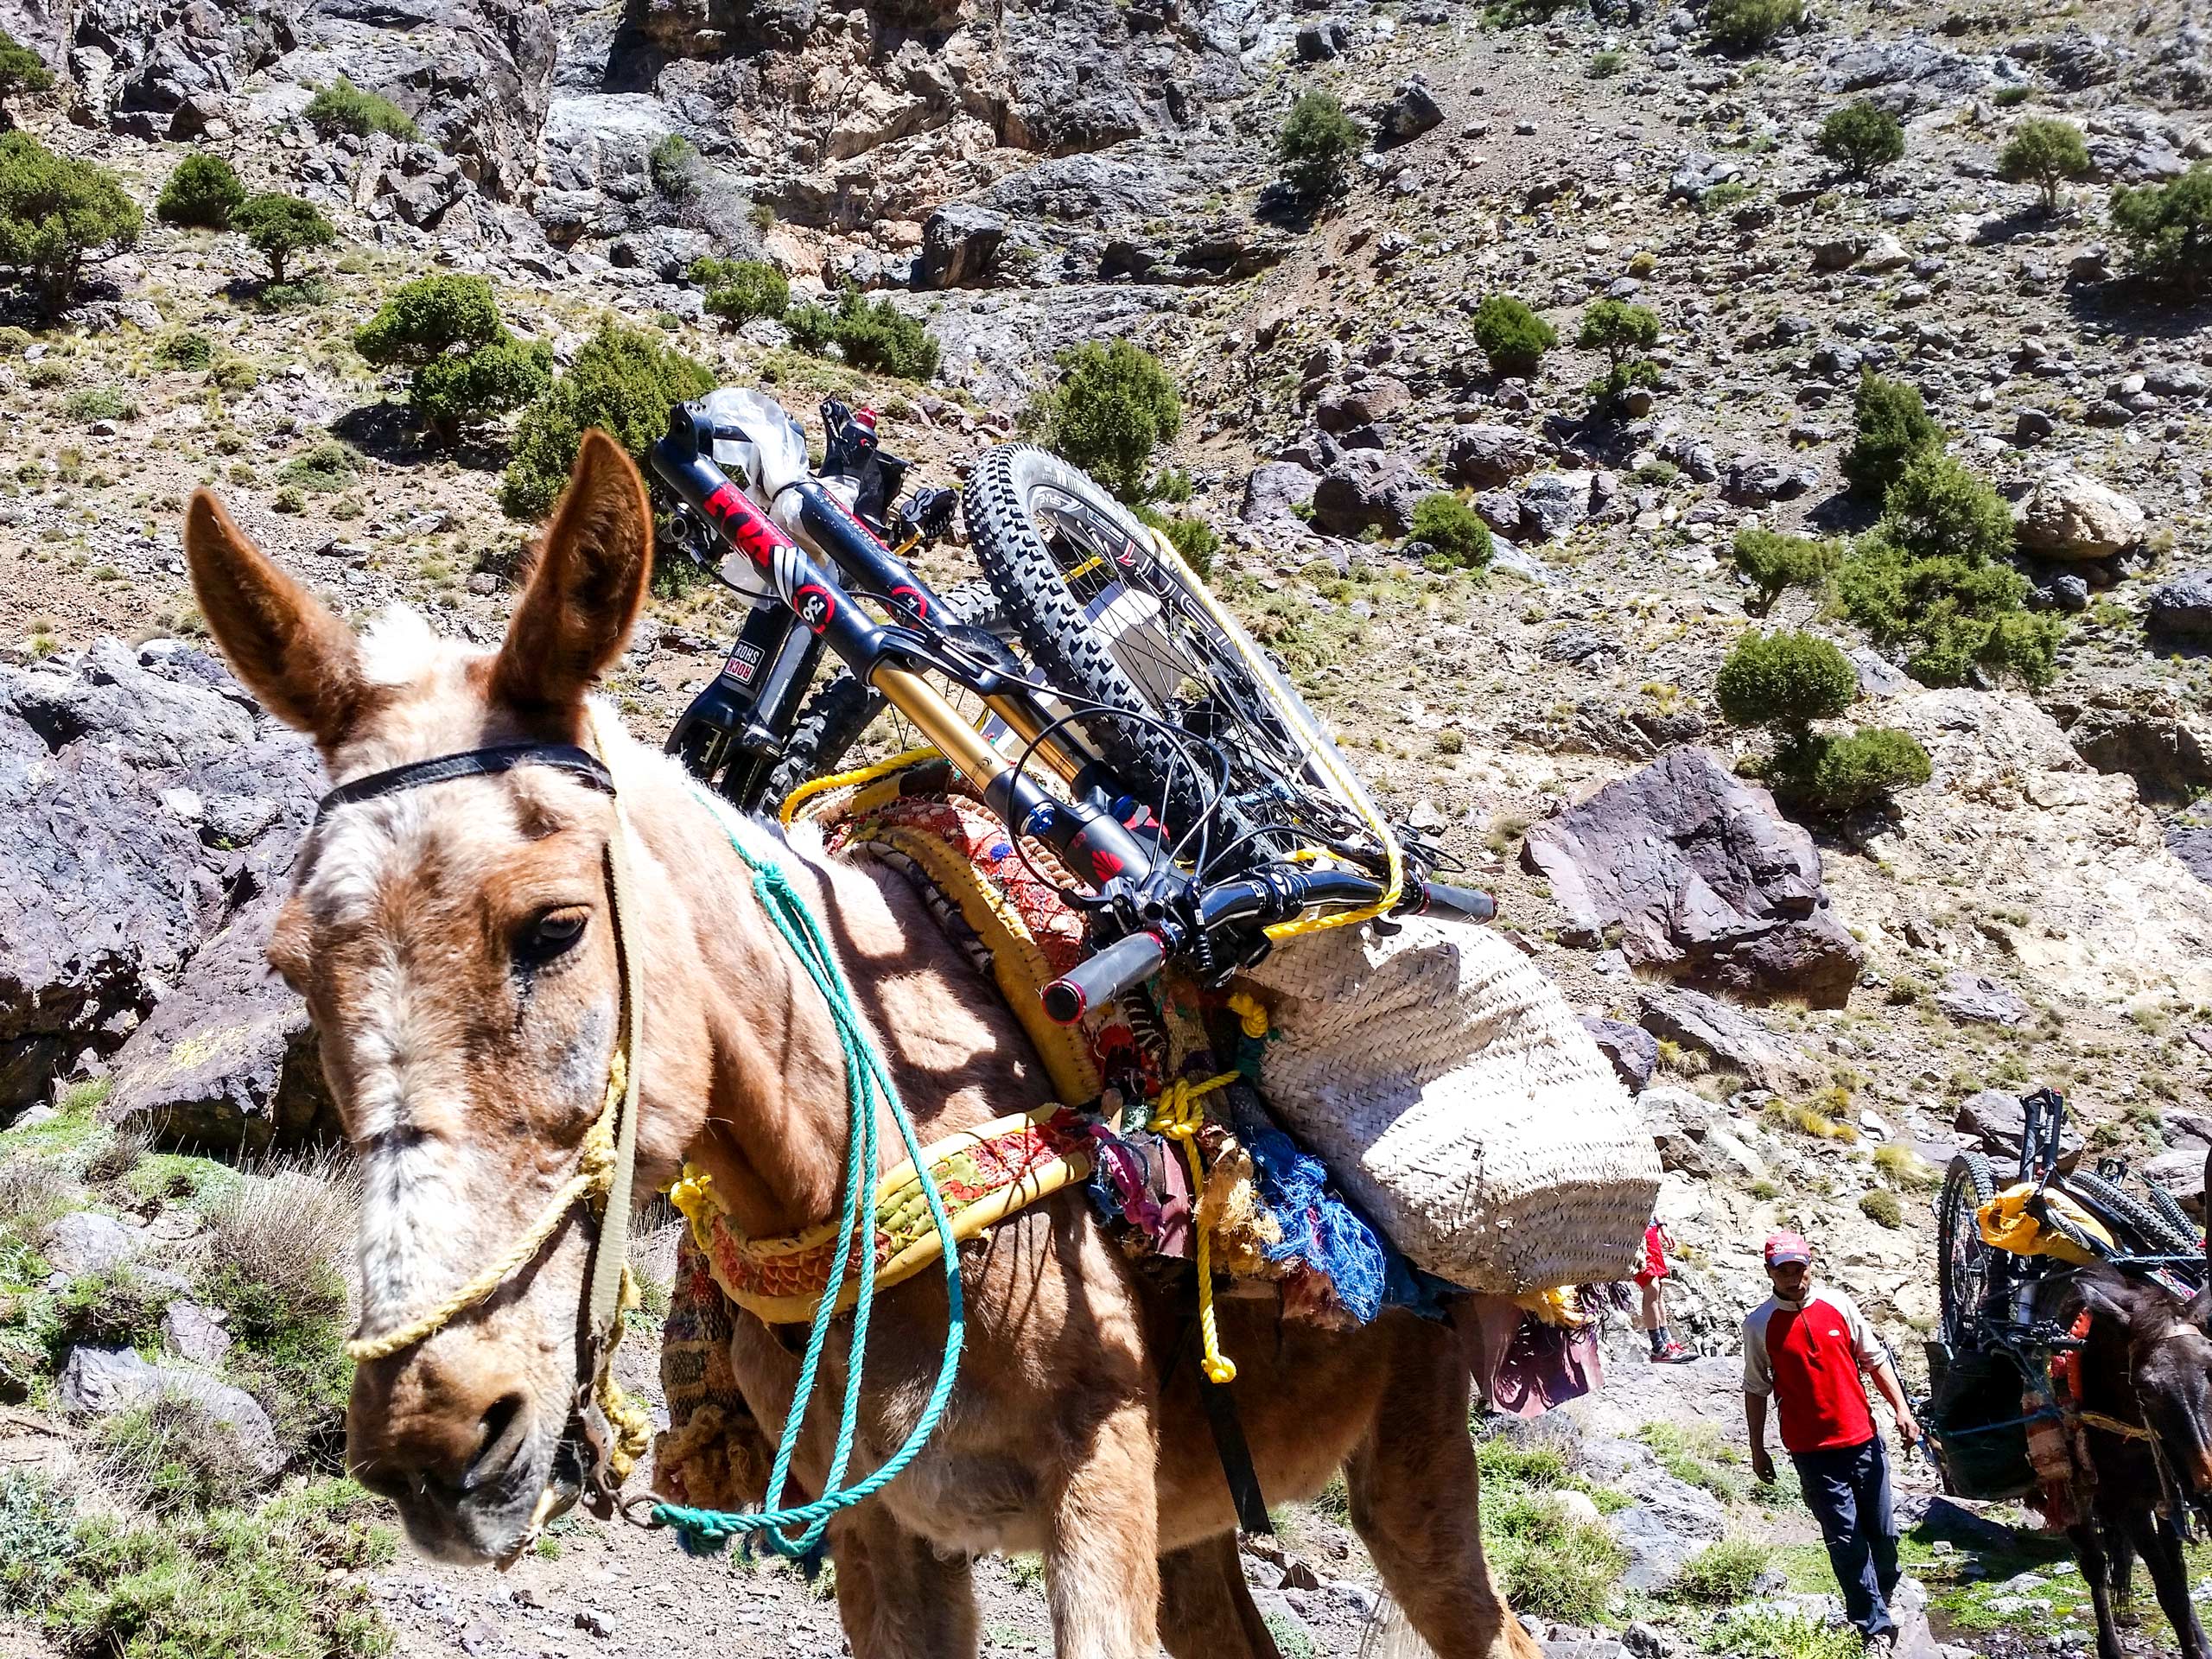 Mules carry bikes on the mountain trail